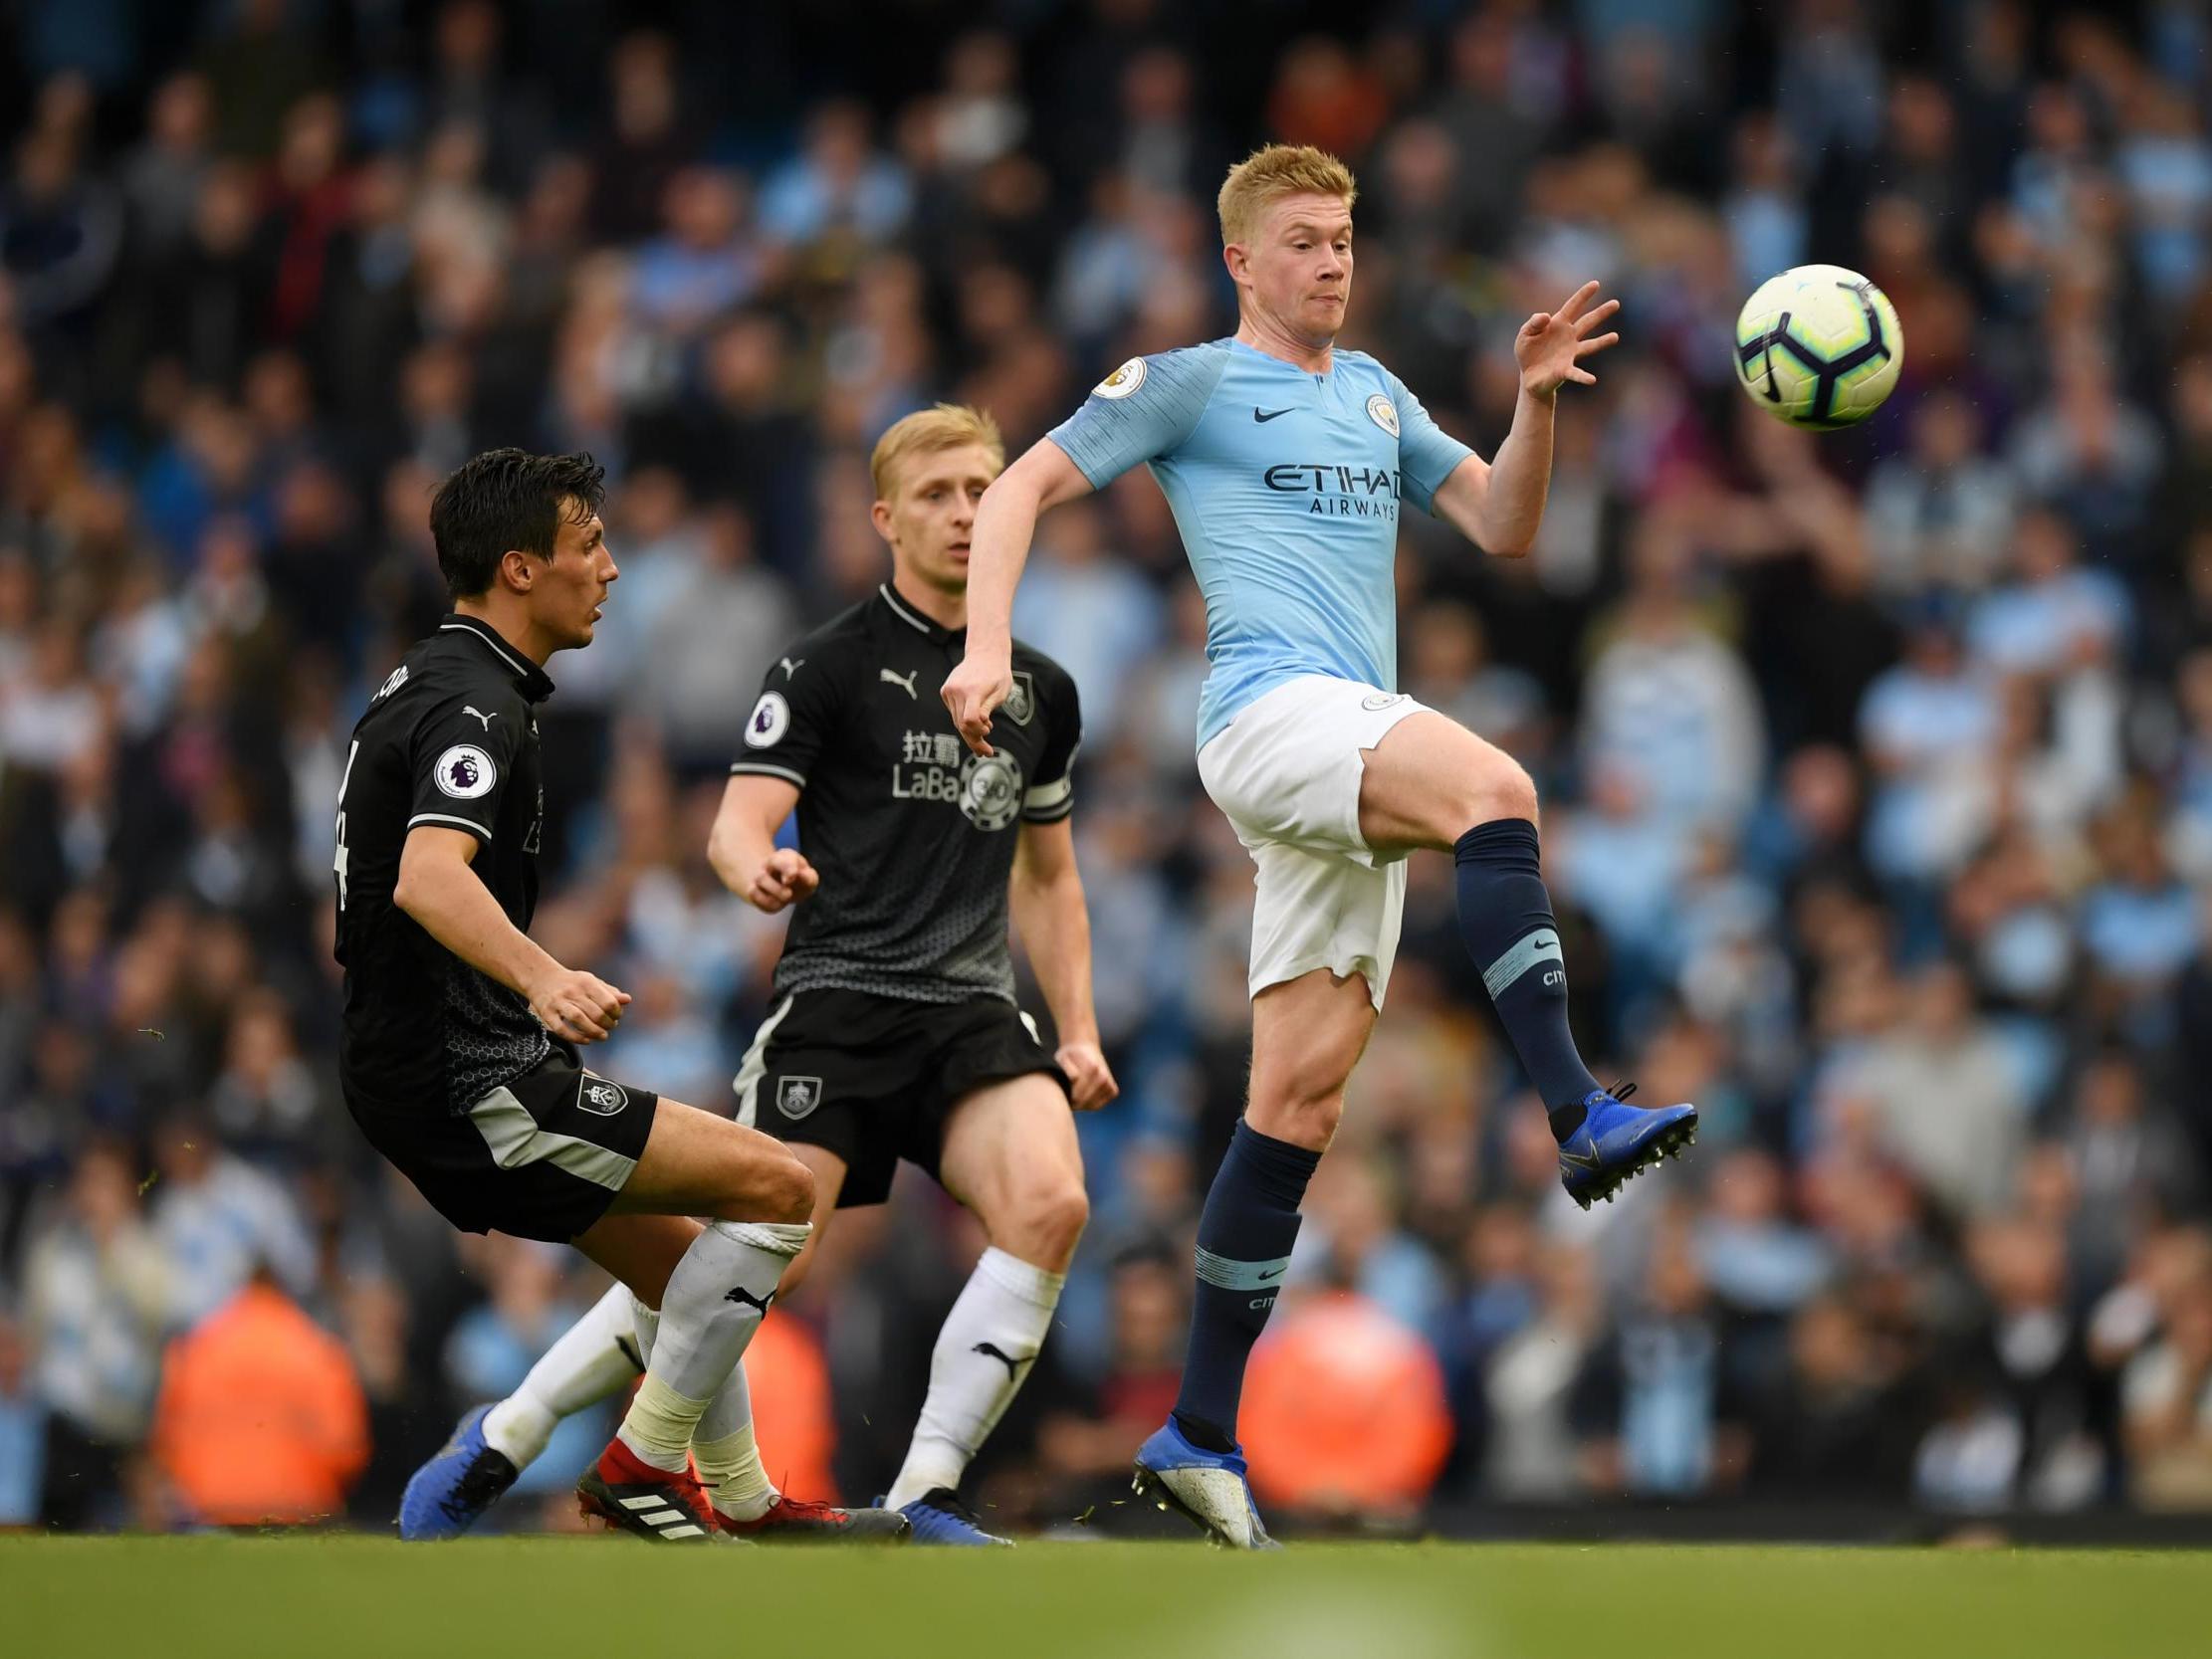 Kevin de Bruyne made his return to action after a lengthy injury spell